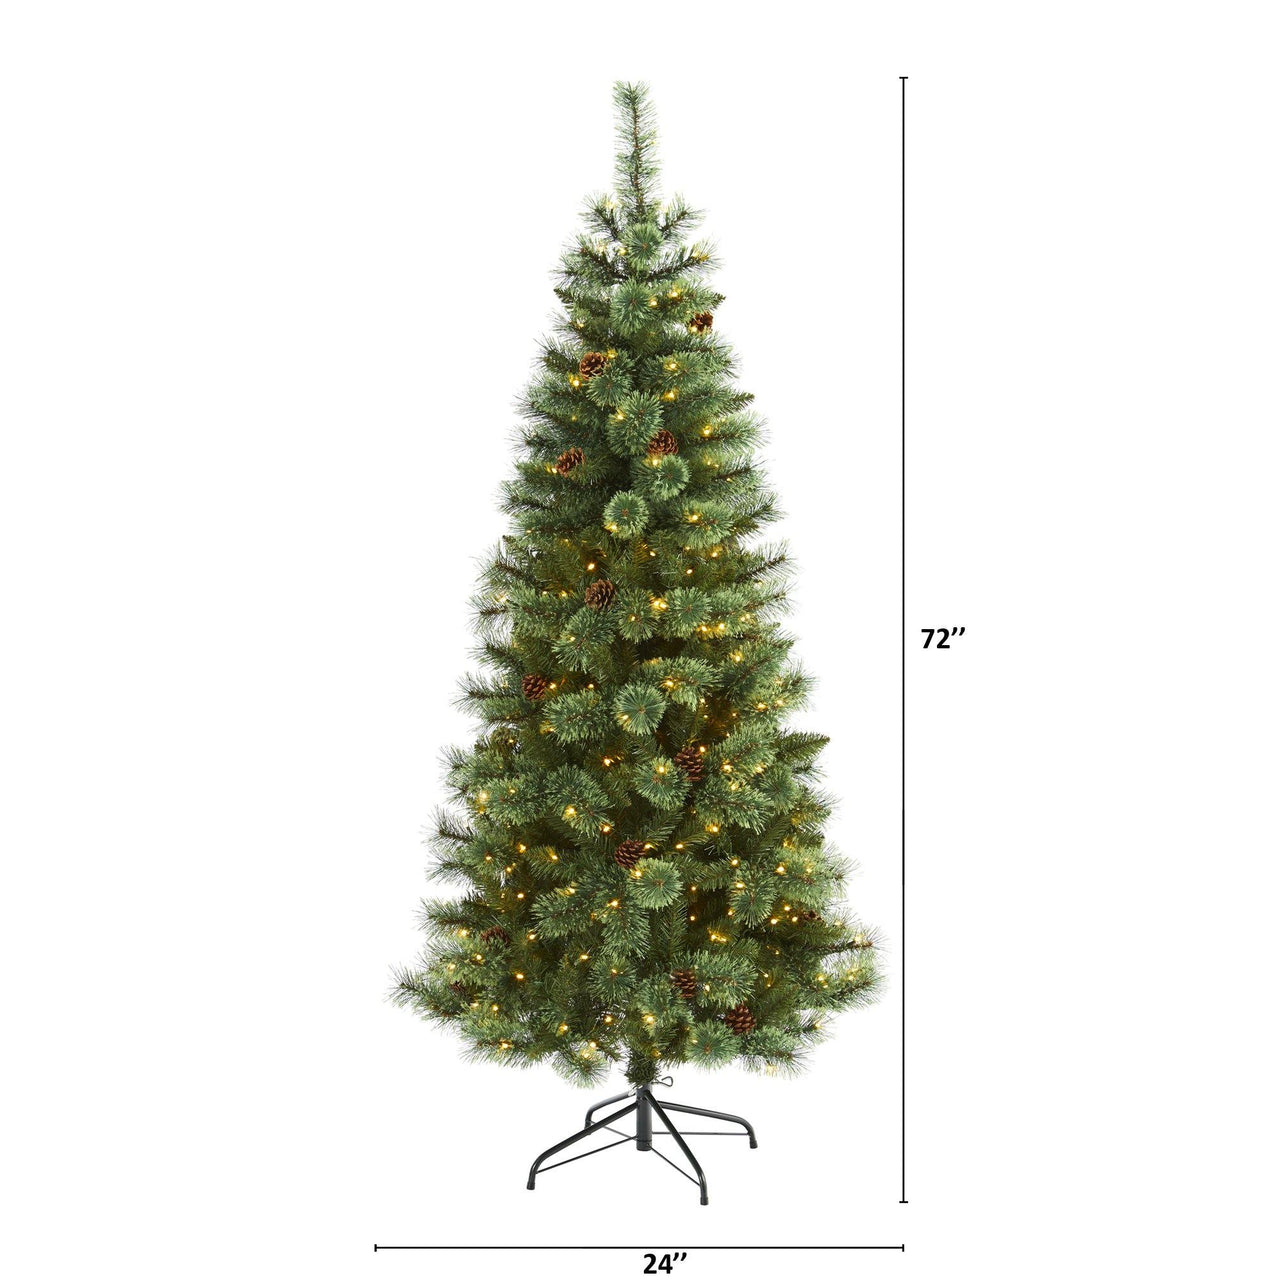 6’ White Mountain Pine Artificial Christmas Tree with 300 Clear LED Lights and Pine Cones - The Fox Decor